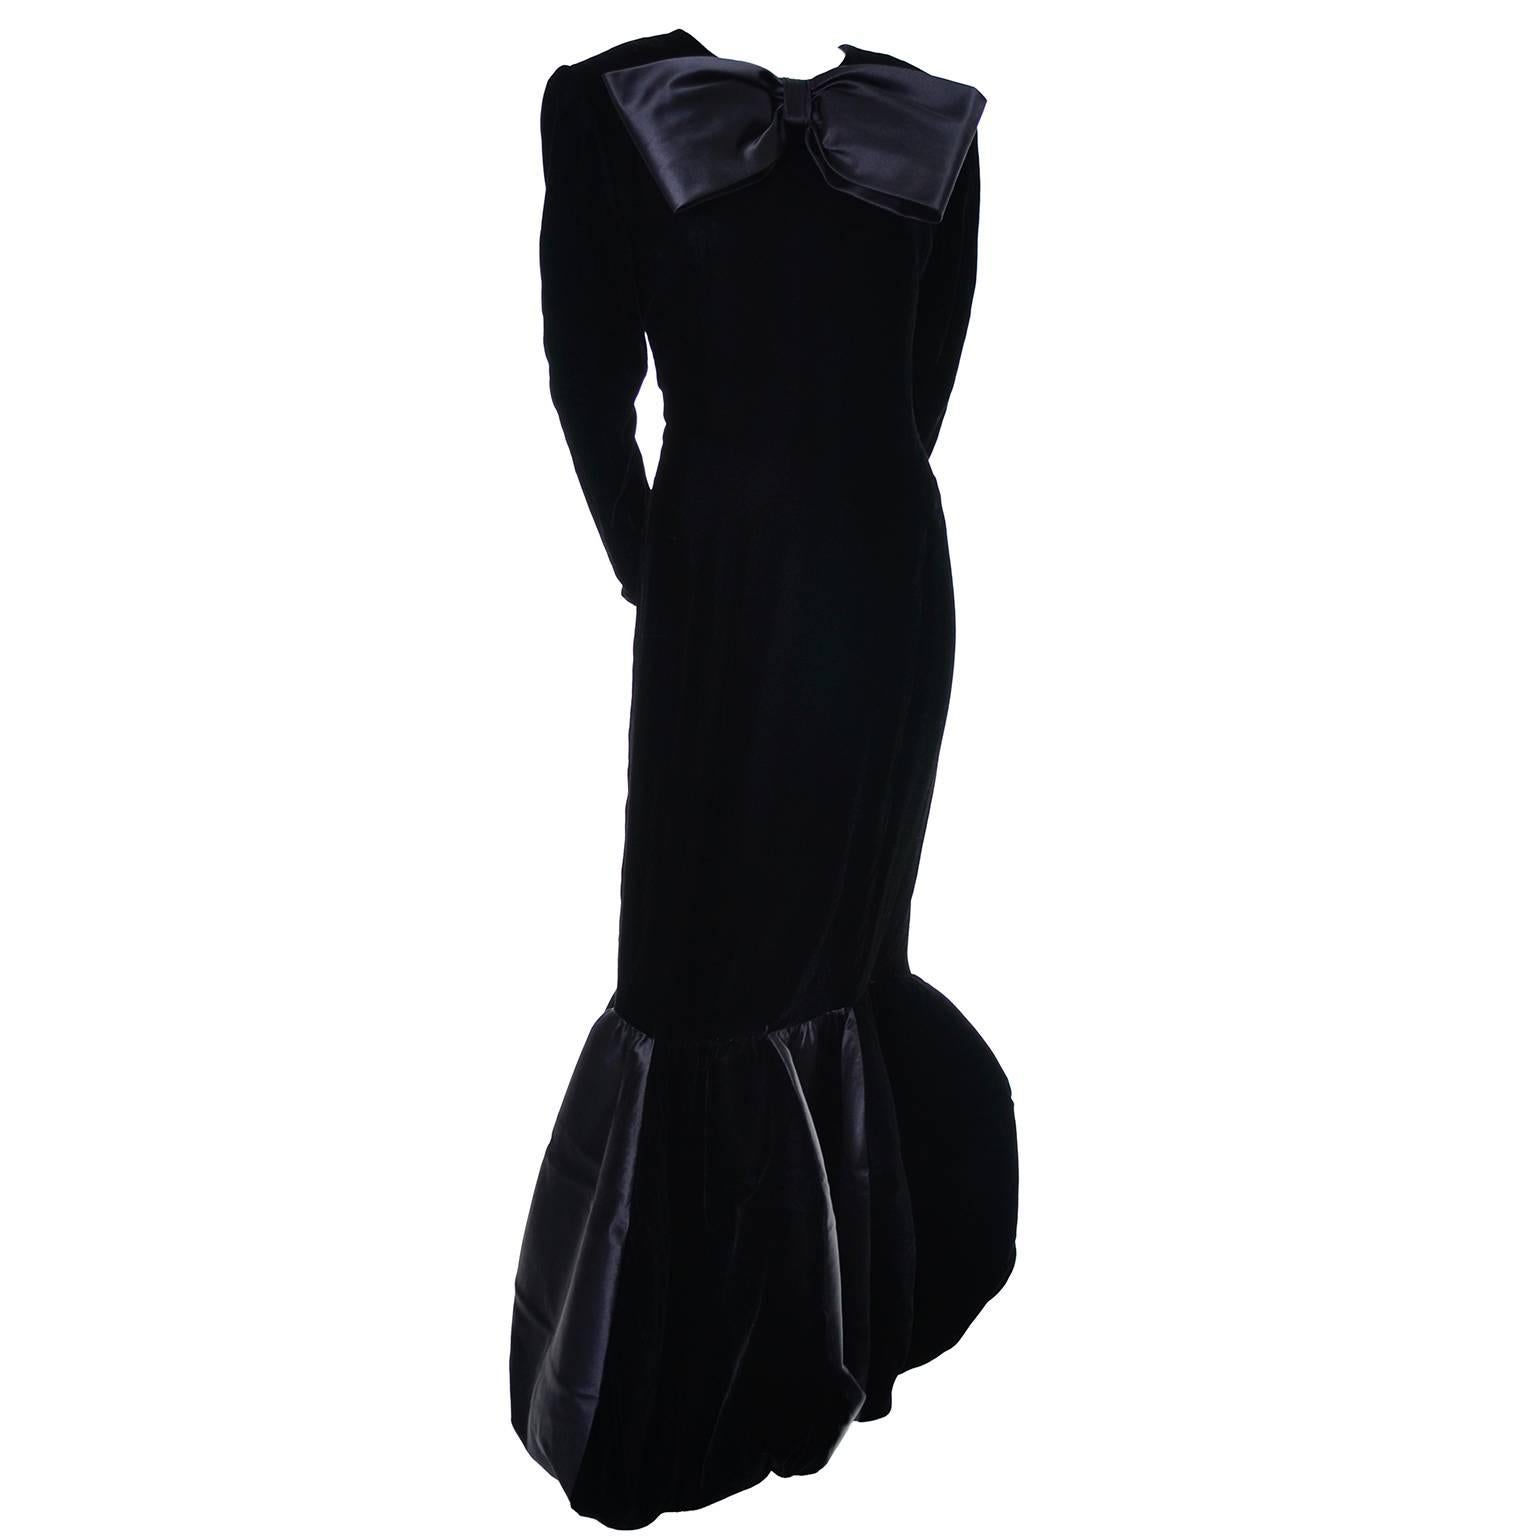 This absolutely stunning vintage Givenchy evening gown was purchased at I Magnin in the 1980's. This avant garde evening gown has a pleated structural flounce at the hemline with velvet and taffeta panels that almost form a balloon hem, and a giant